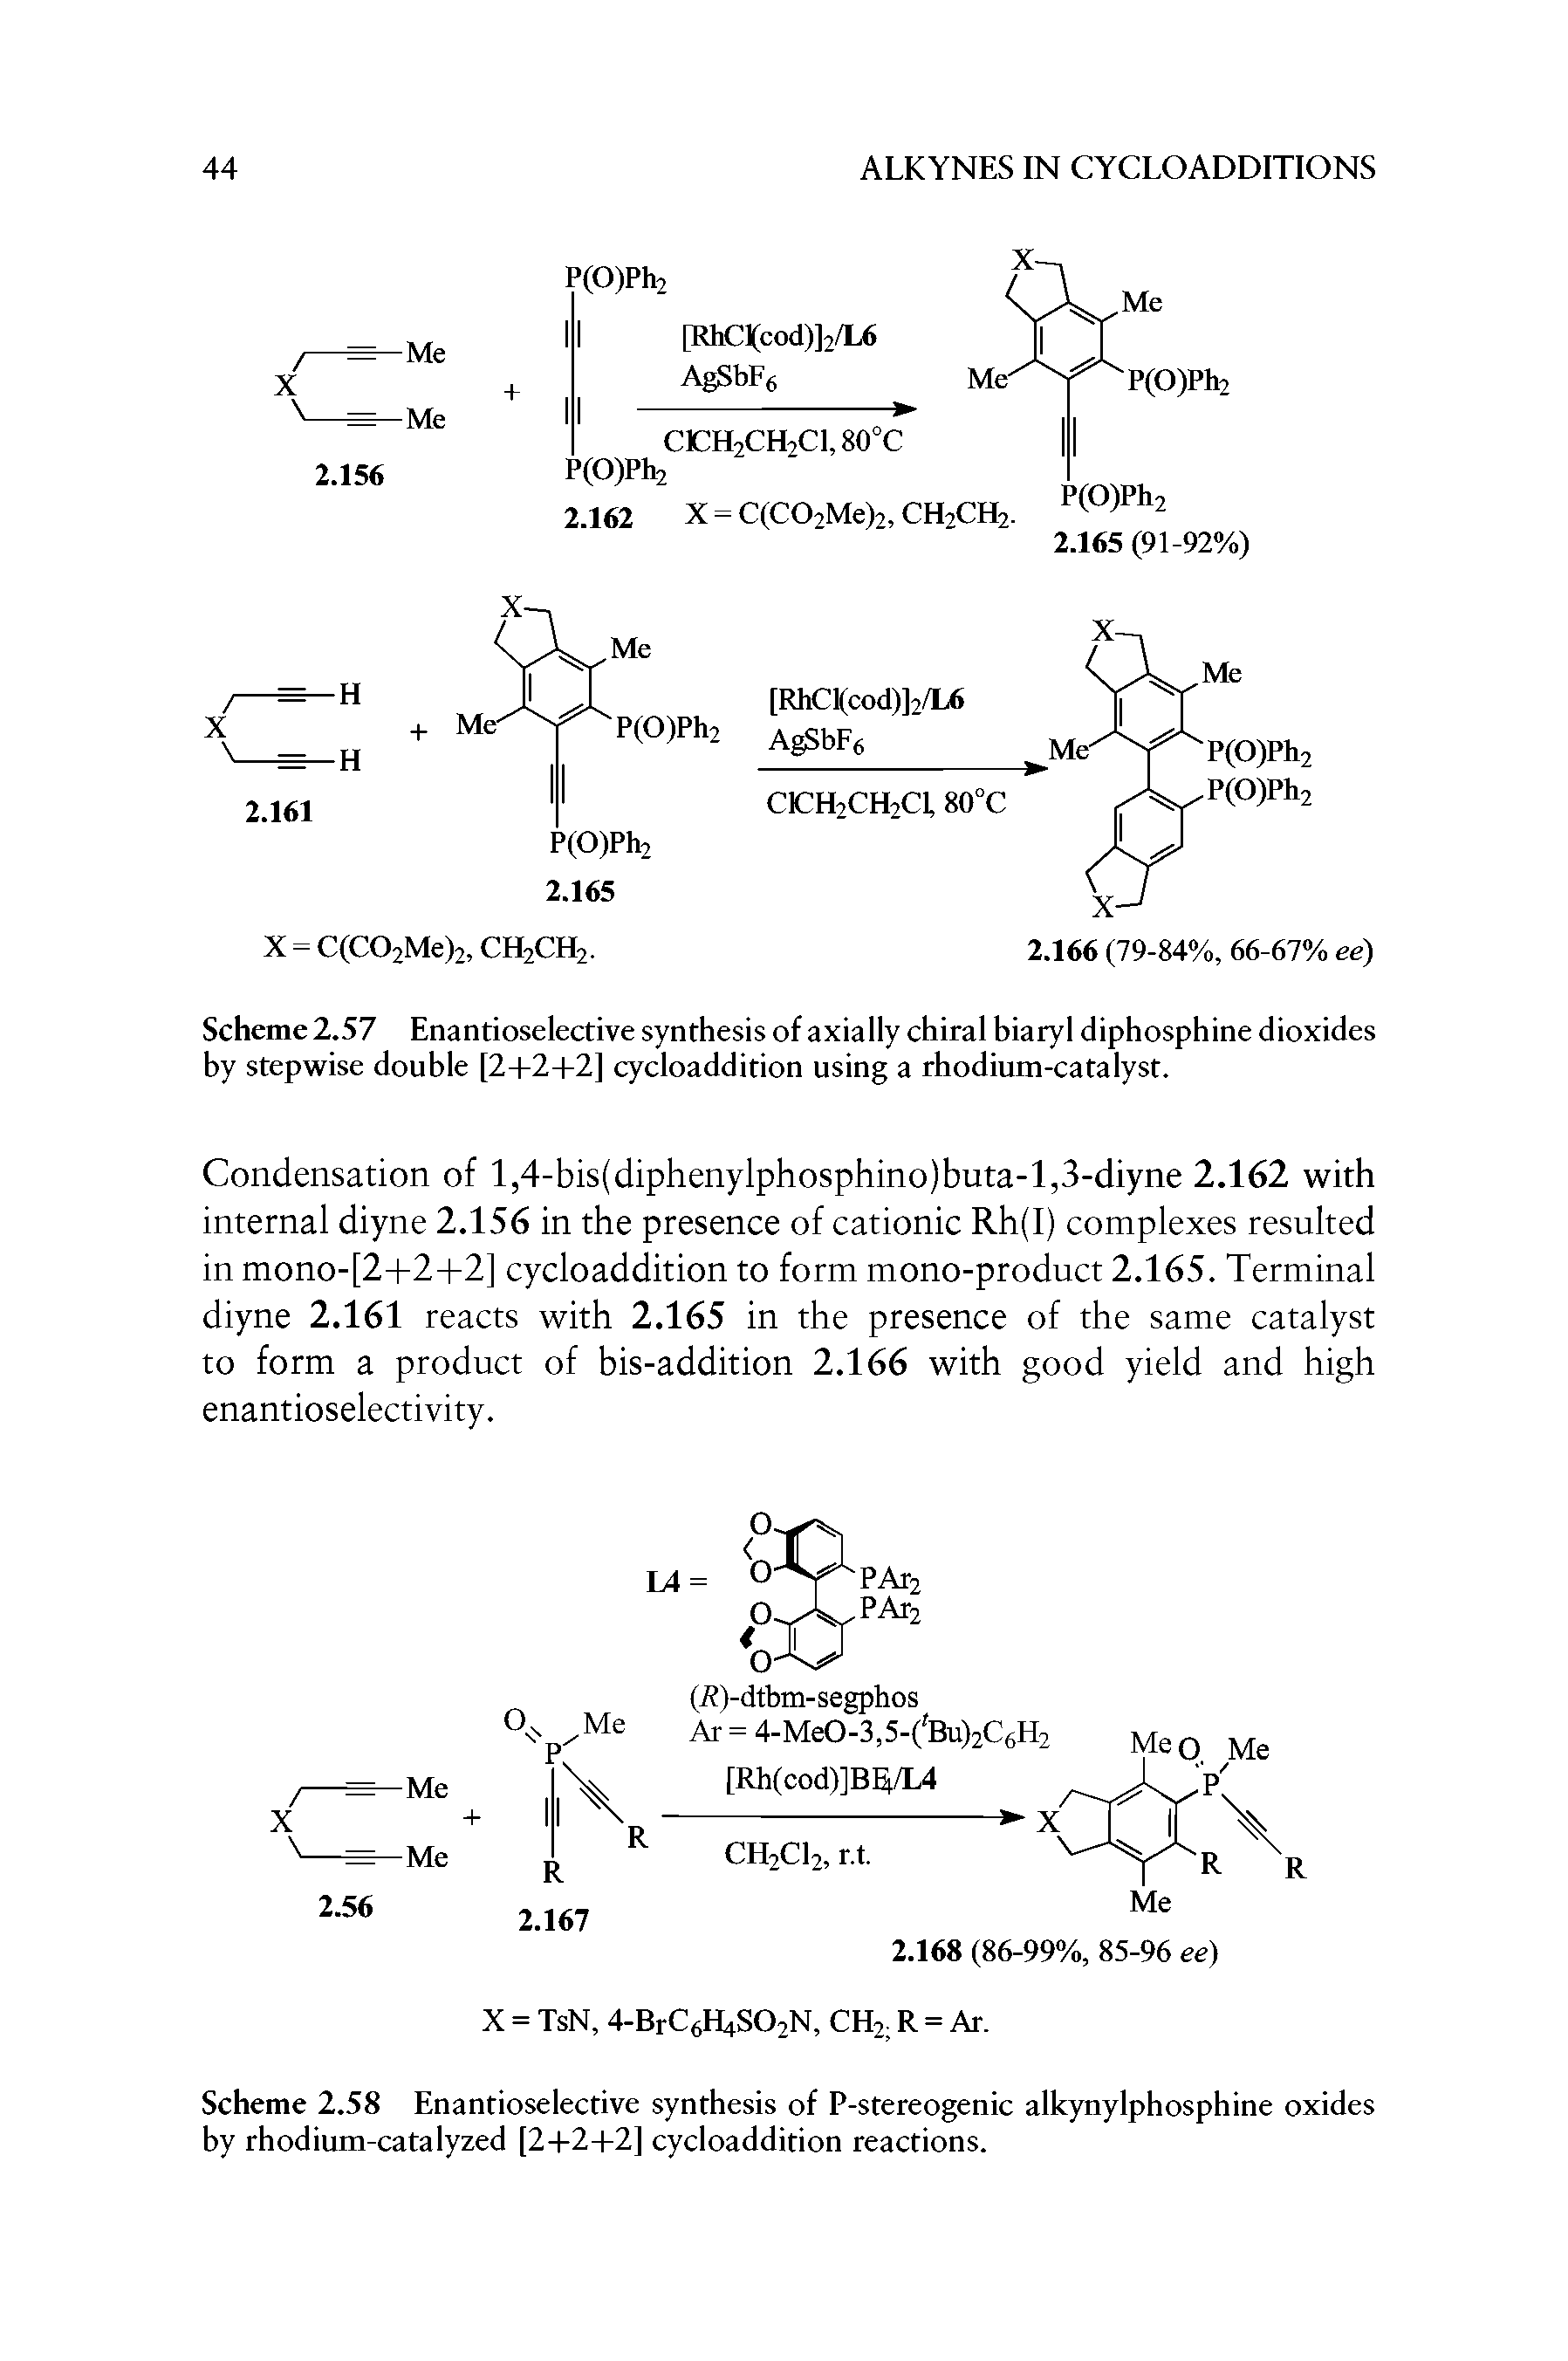 Scheme 2.57 Enantioselective synthesis of axially chiral biaryl diphosphine dioxides by stepwise double [24-24-2] cycloaddition using a rbodium-catalyst.